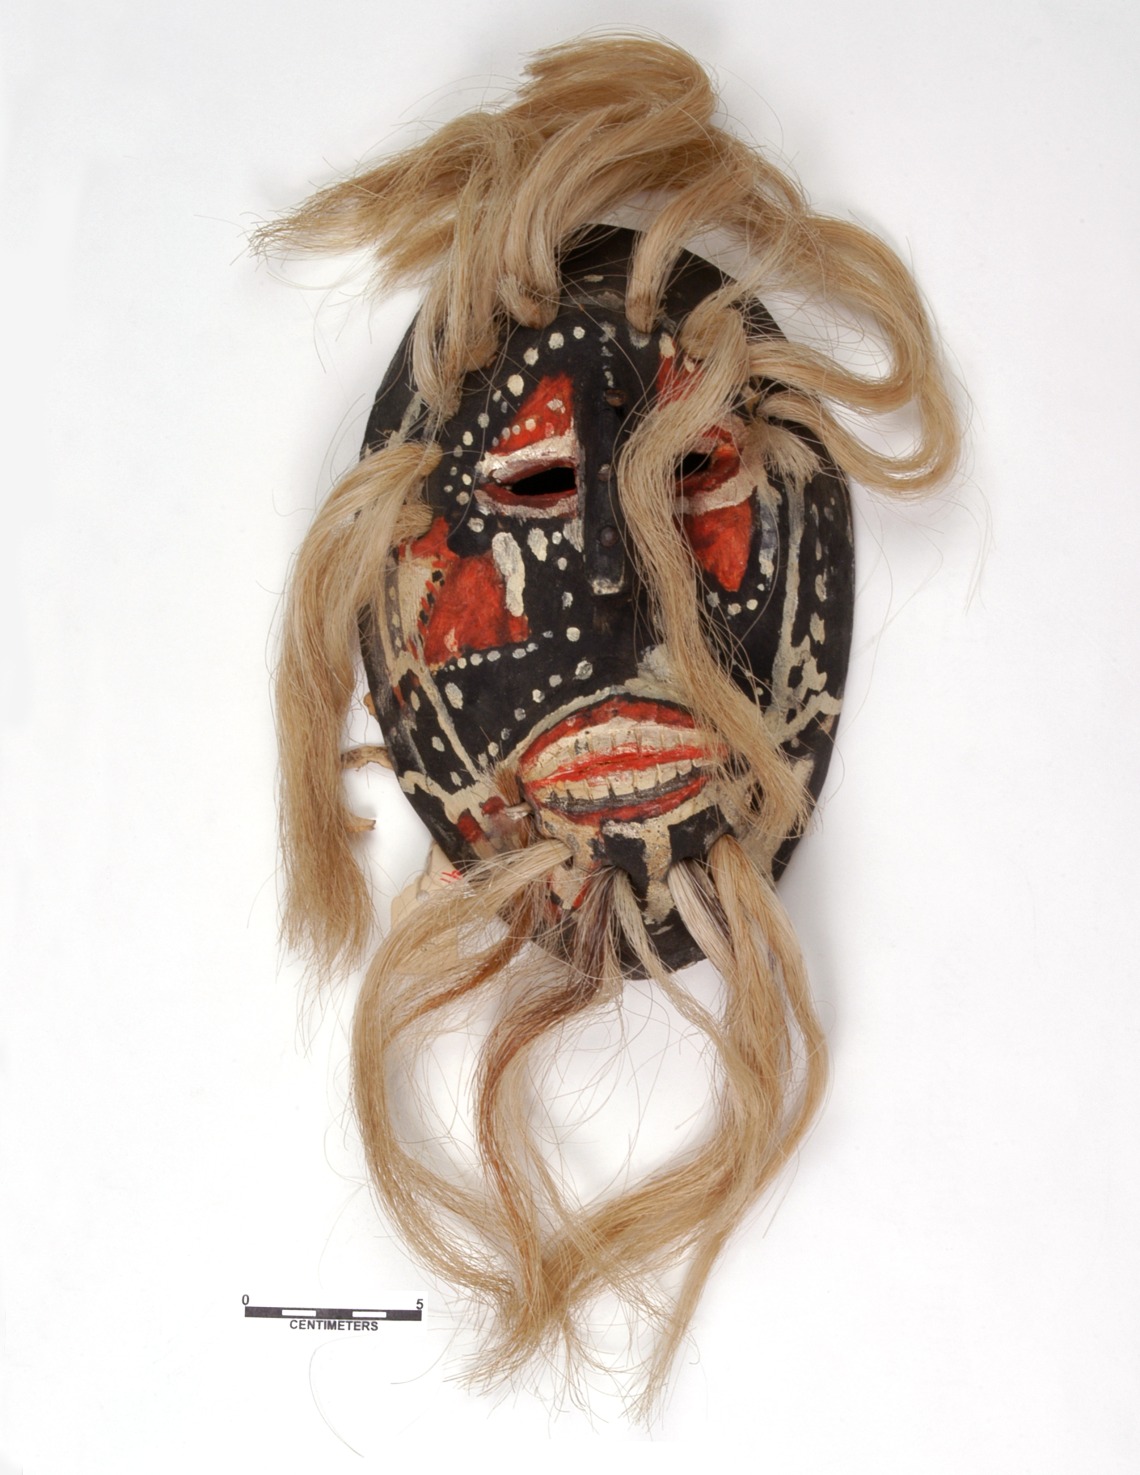 Maker: Brígido Moroyoki, Buaysiacobe; date made unknown, acquired 1965